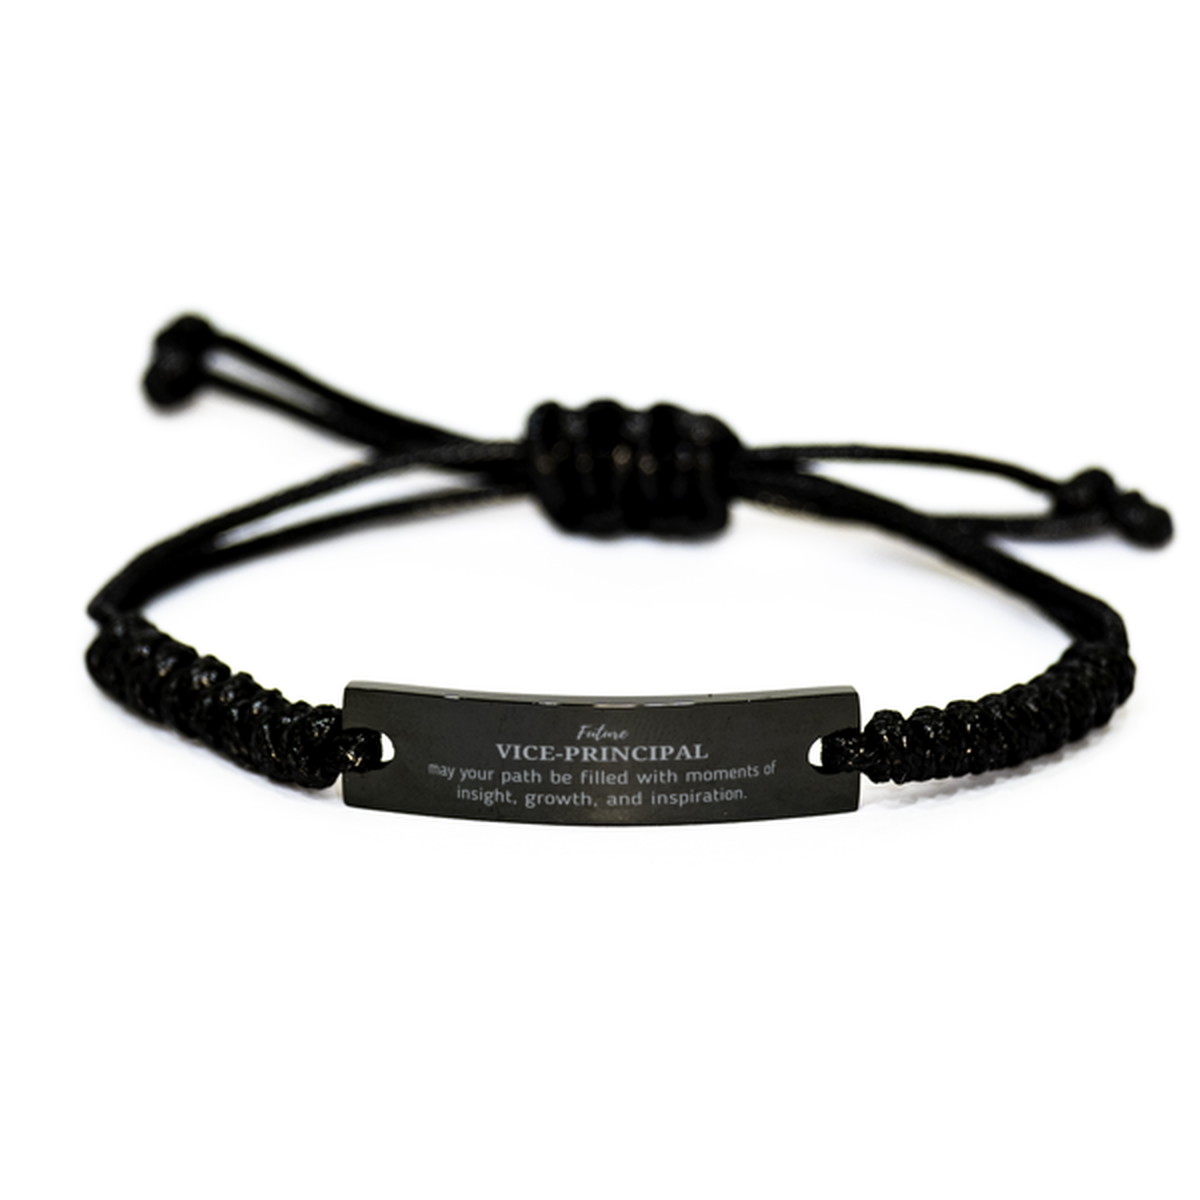 Future Vice-principal Gifts, May your path be filled with moments of insight, Graduation Gifts for New Vice-principal, Christmas Unique Black Rope Bracelet For Men, Women, Friends